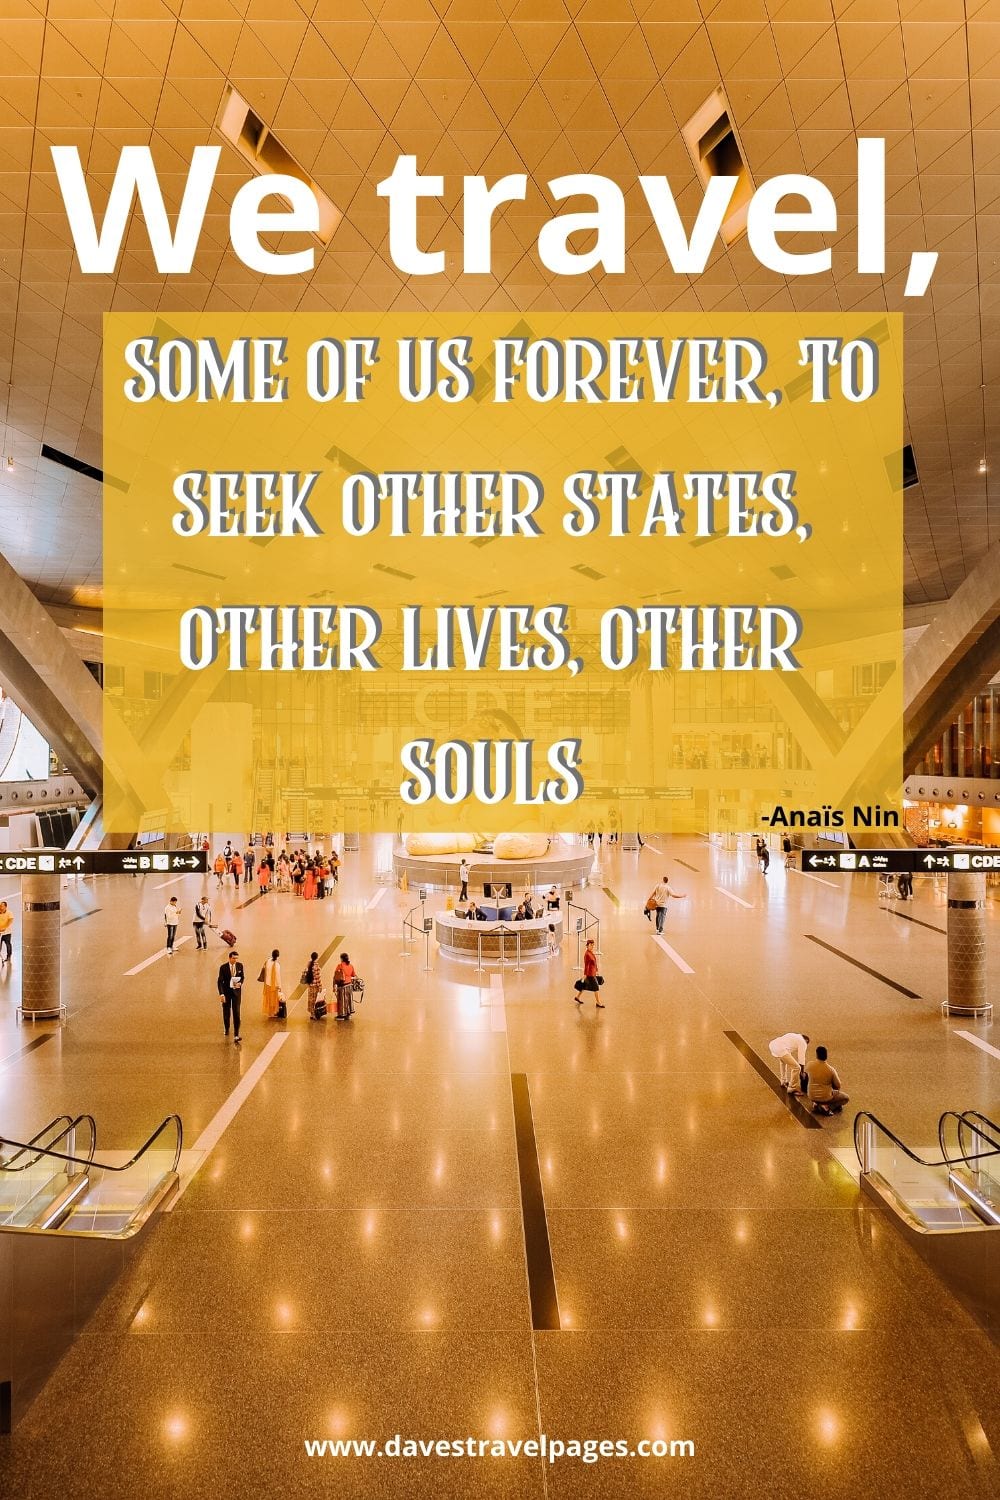 Top wanderlust quotes: We travel, some of us forever, to seek other states, other lives, other souls.”-Anaïs Nin